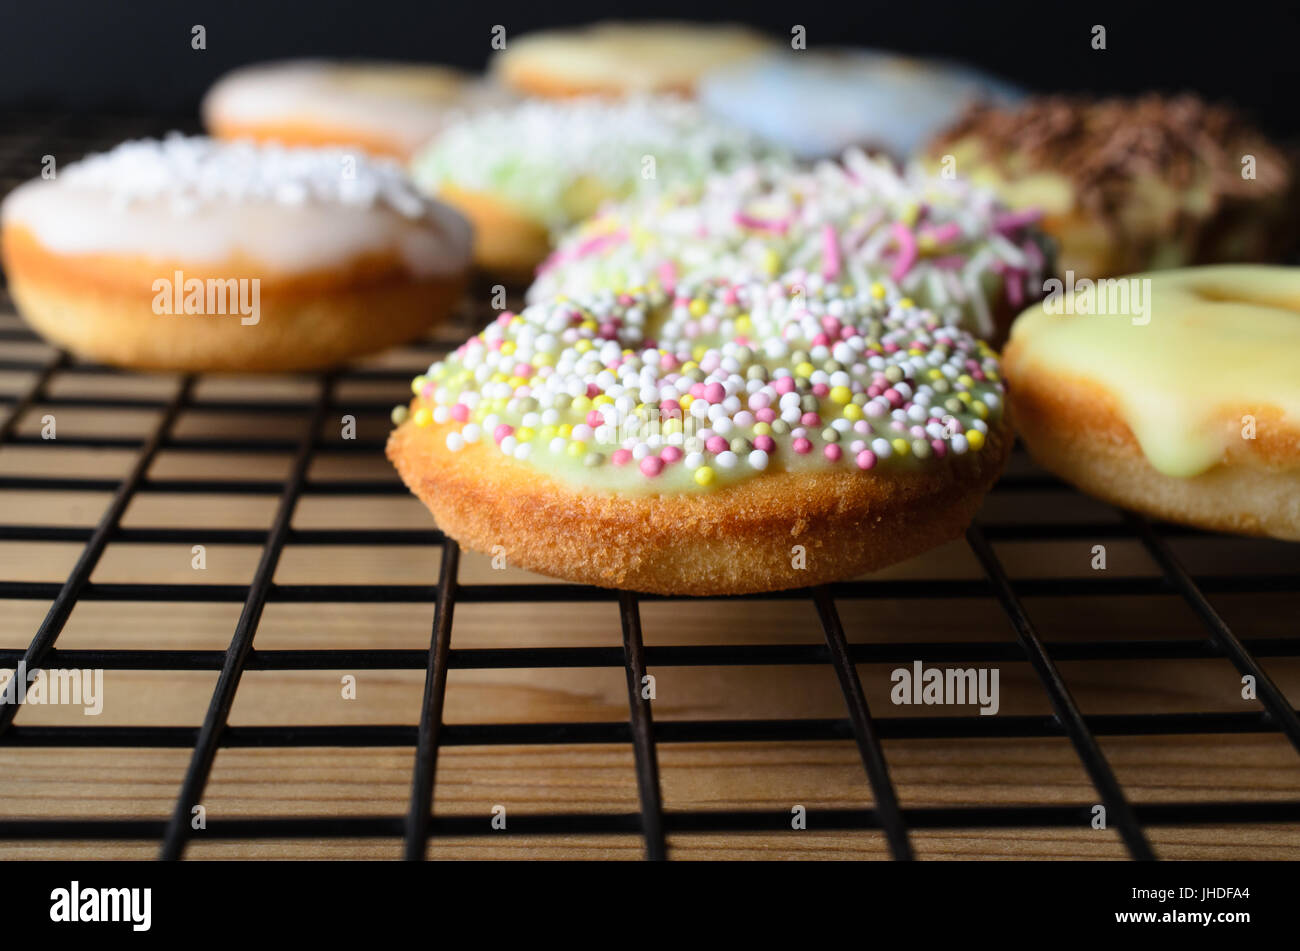 Home baked mini doughnut sponge cakes, with a variety of decorative sprinkles, on a black wire cooling rack and wooden table. Stock Photo